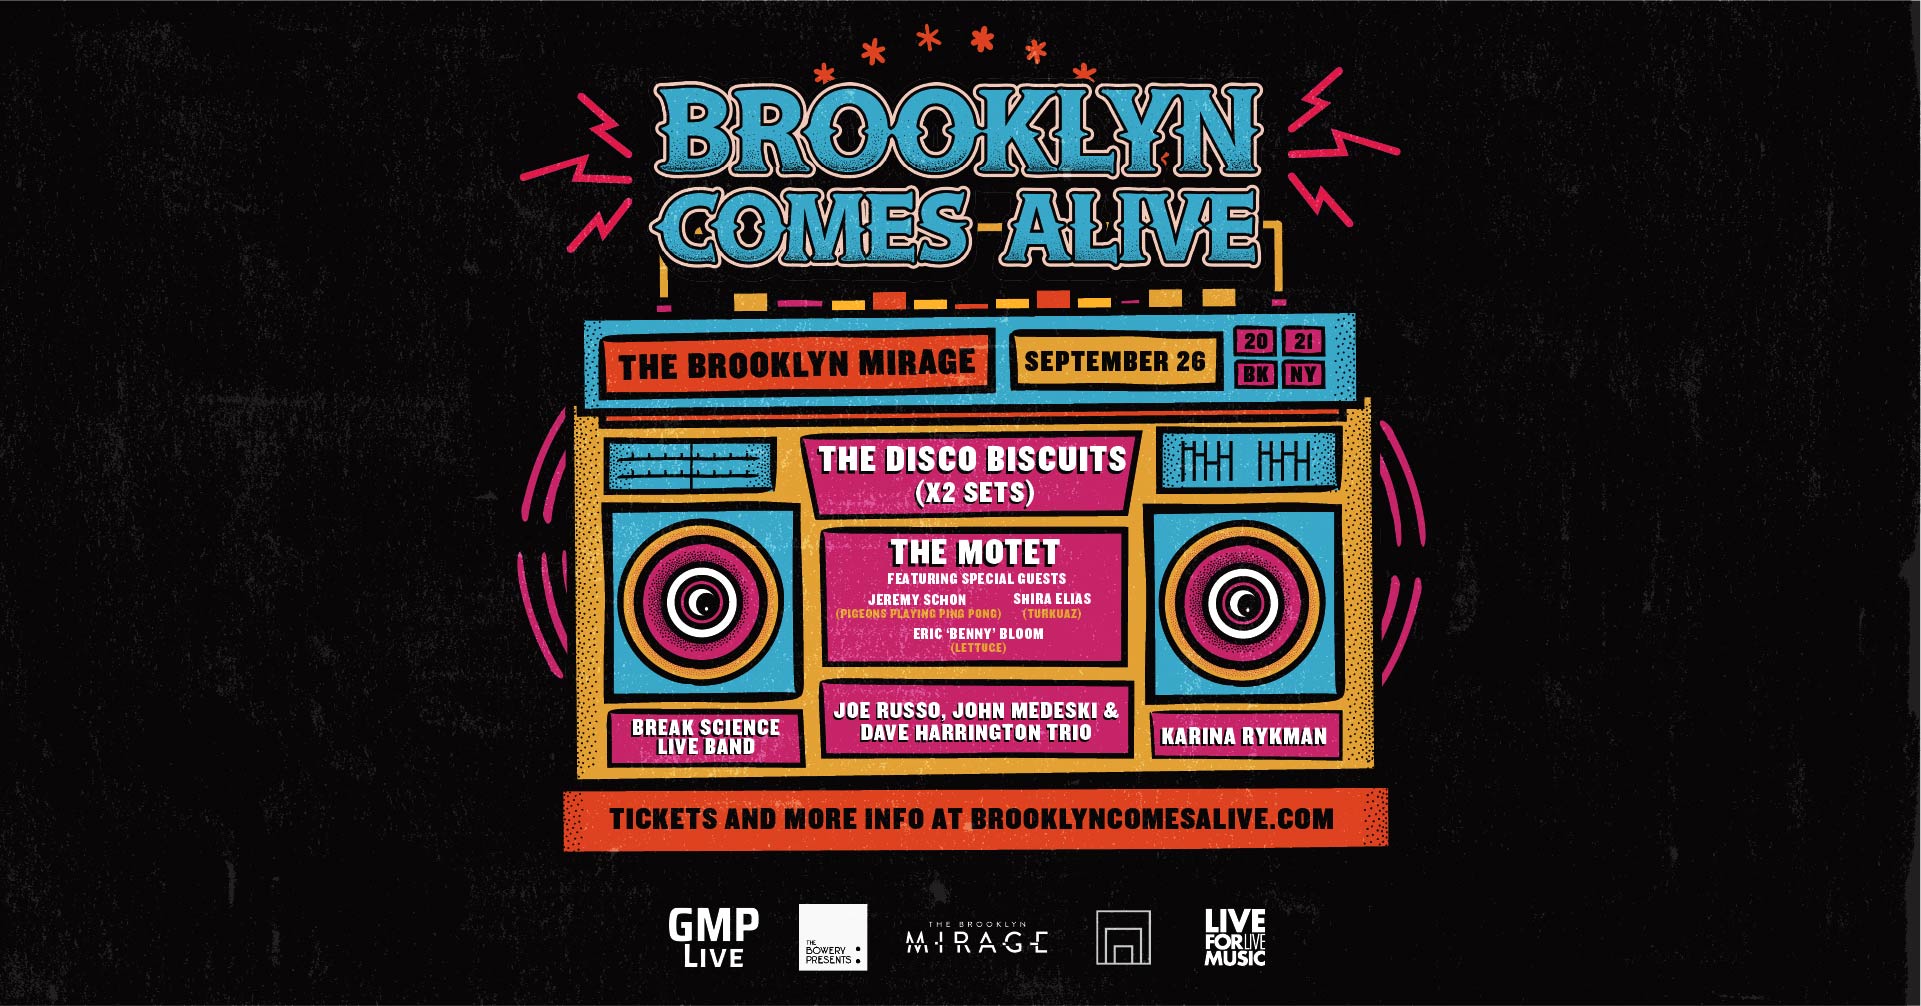 Brooklyn Comes Alive Will Showcase Disco Biscuits Headlining Sets, New Break Science Live Band and More